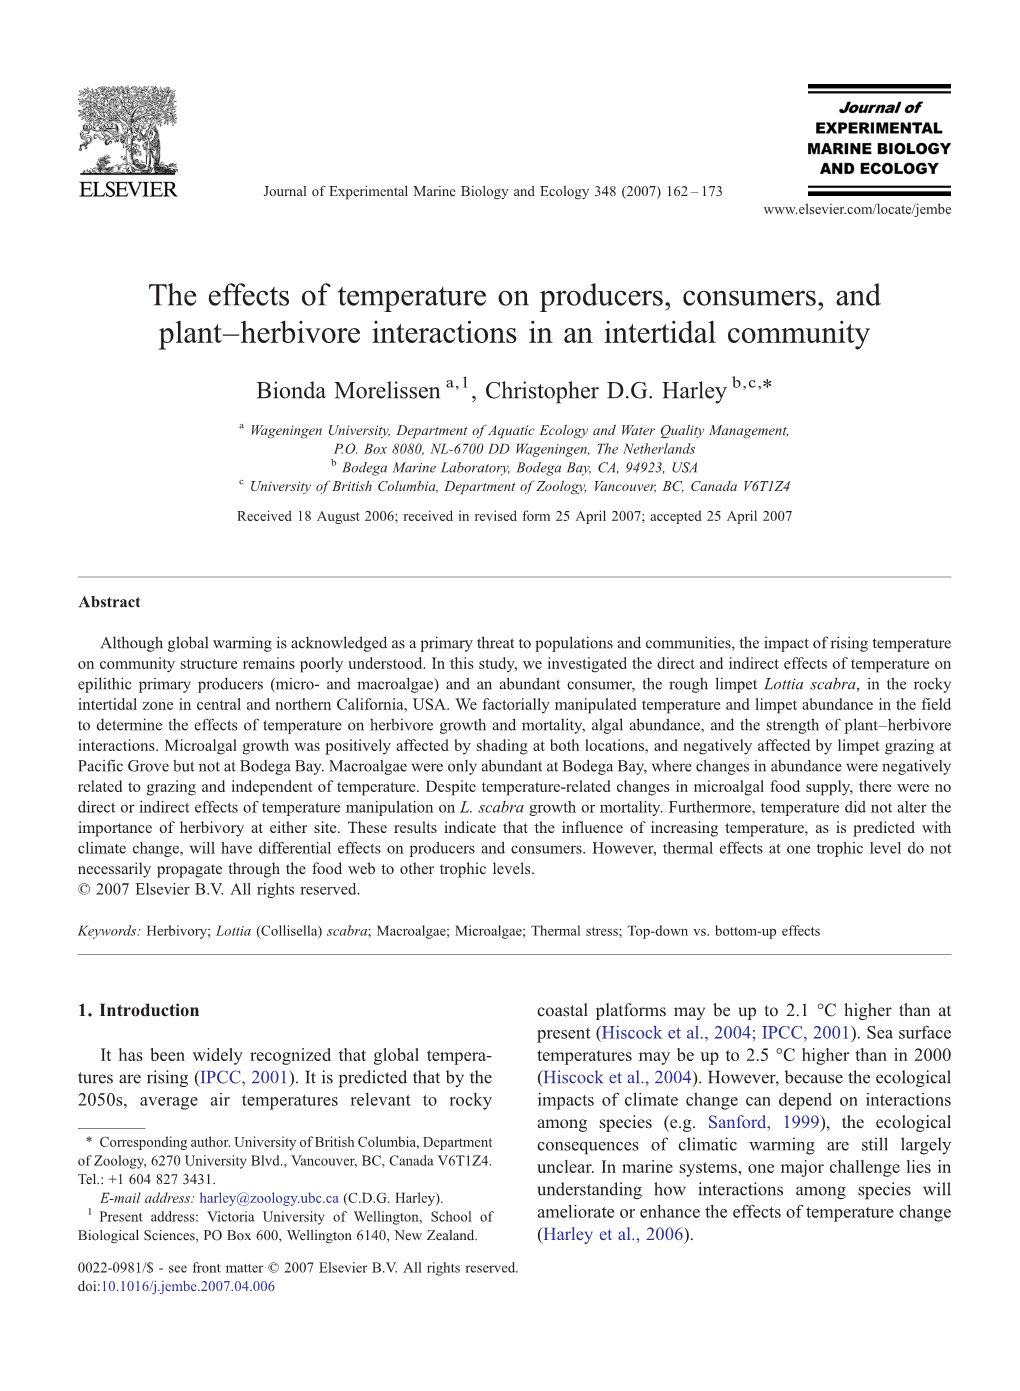 The Effects of Temperature on Producers, Consumers, and Plant–Herbivore Interactions in an Intertidal Community ⁎ Bionda Morelissen A,1, Christopher D.G